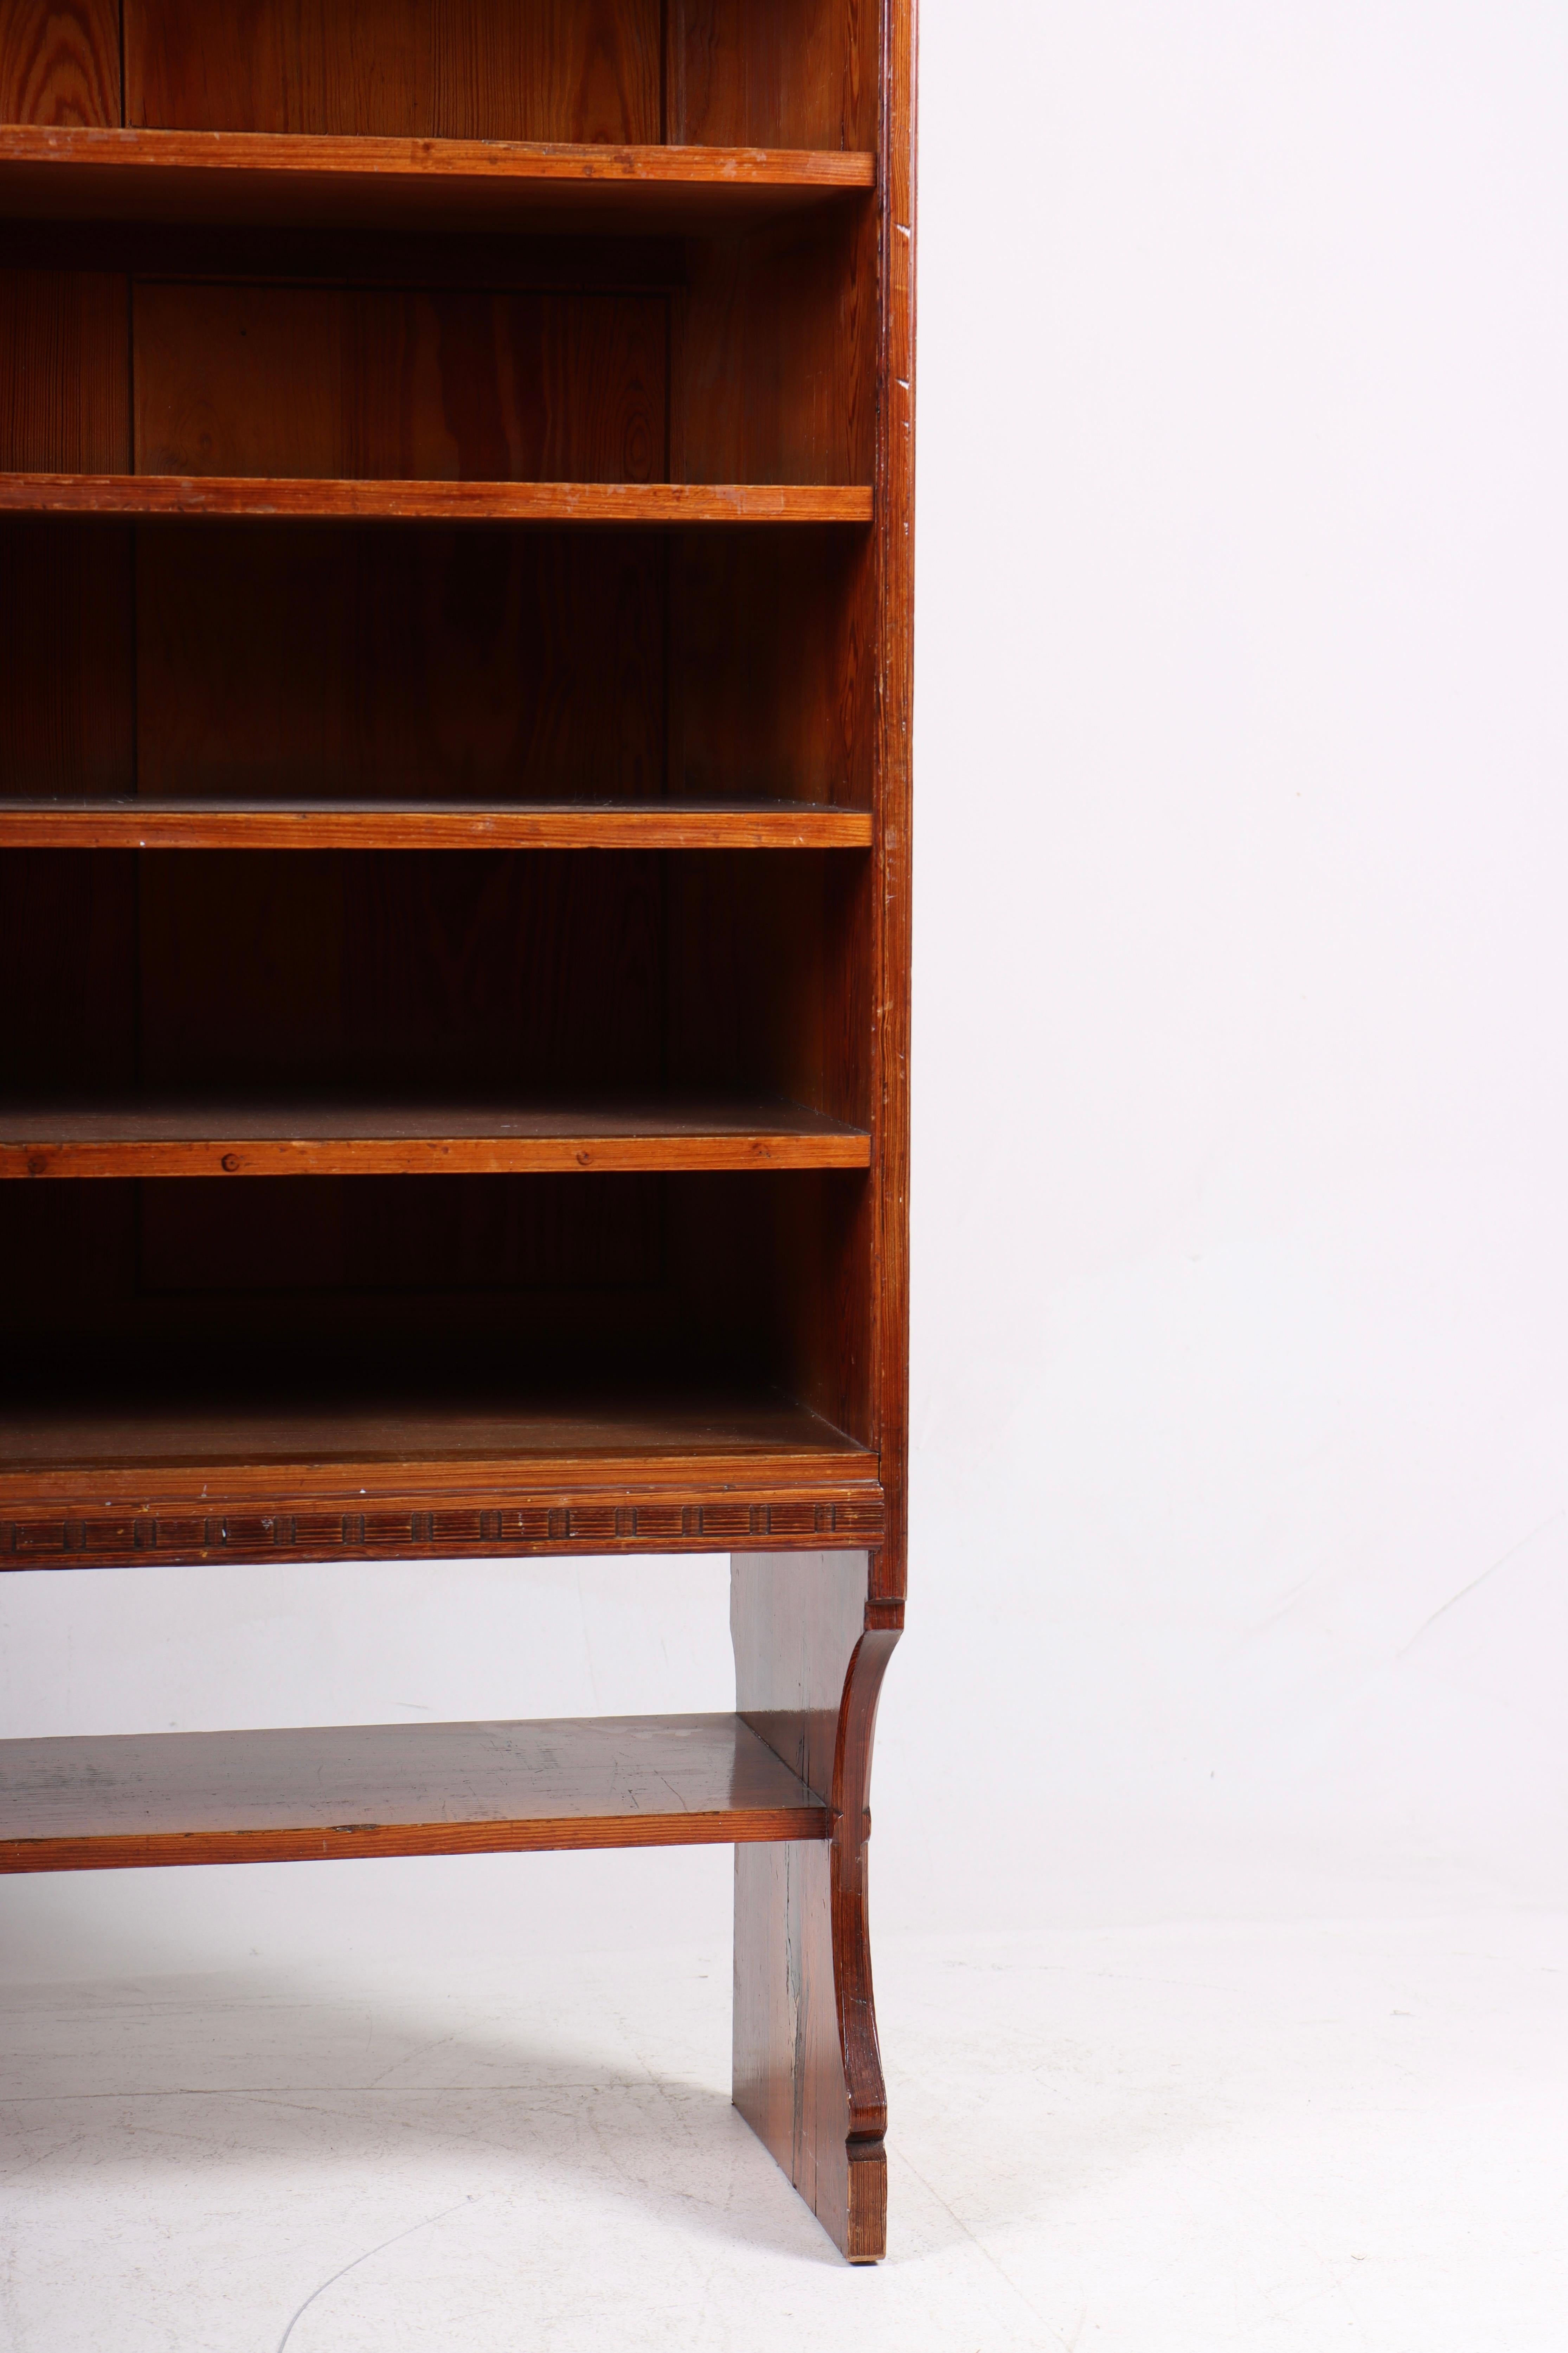 Bookcase in patinated solid pine. Designed by MAA. Martin Nyrop as interior for Copenhagen town hall in 1905. Made in Denmark by Cabinetmaker Rud Rasmussen cabinetmakers. Great original condition.